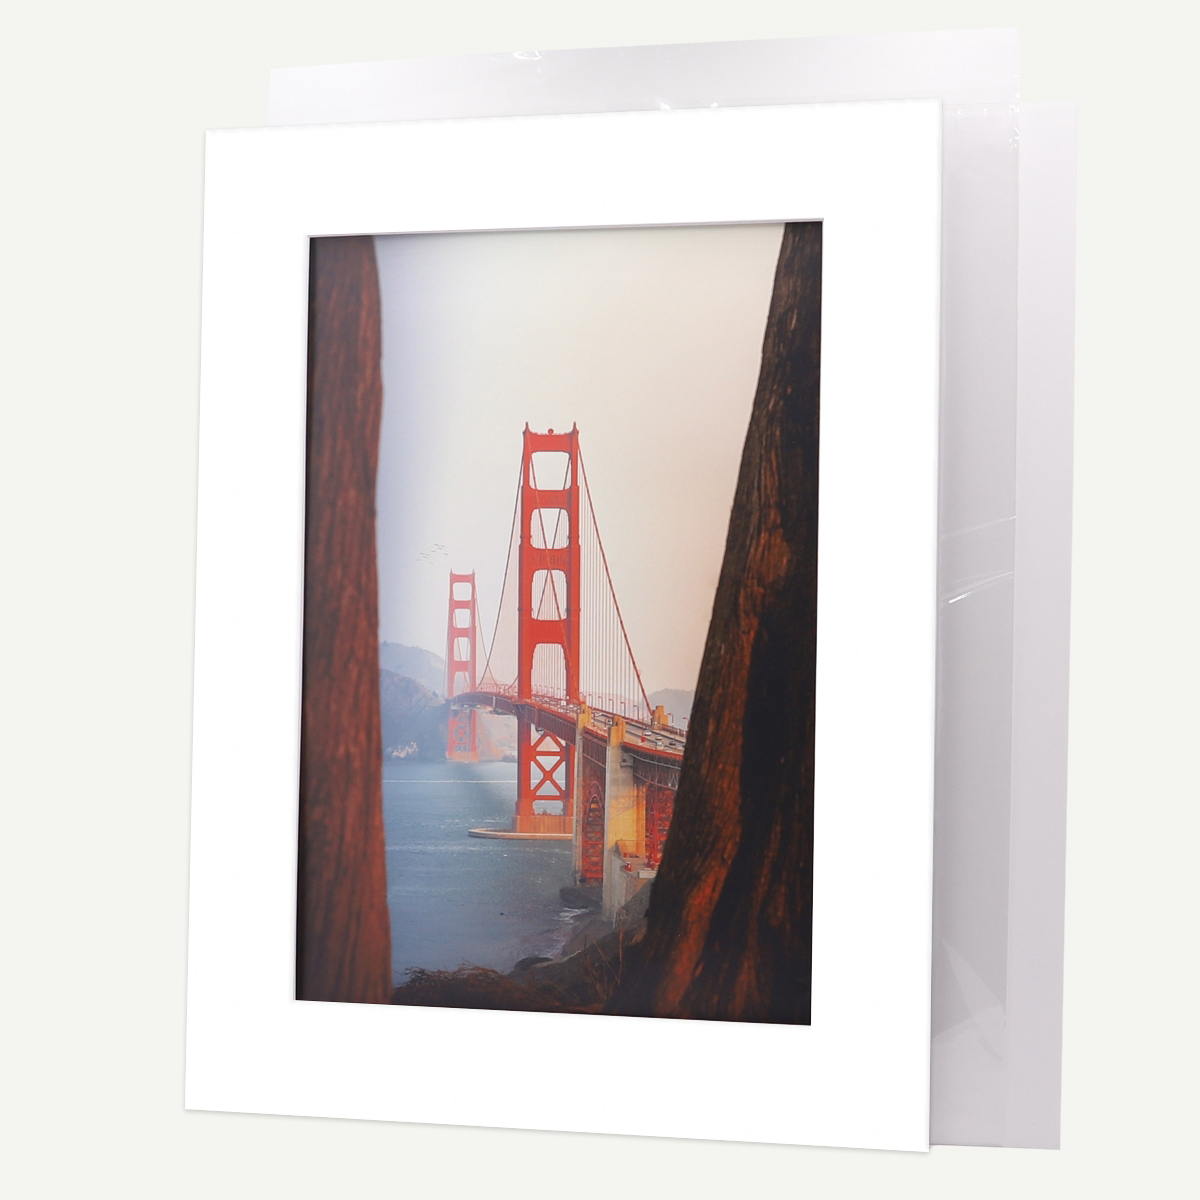 Golden State Art,8x10 Pre-cut Mat with Whitecore fits 5x7 Picture